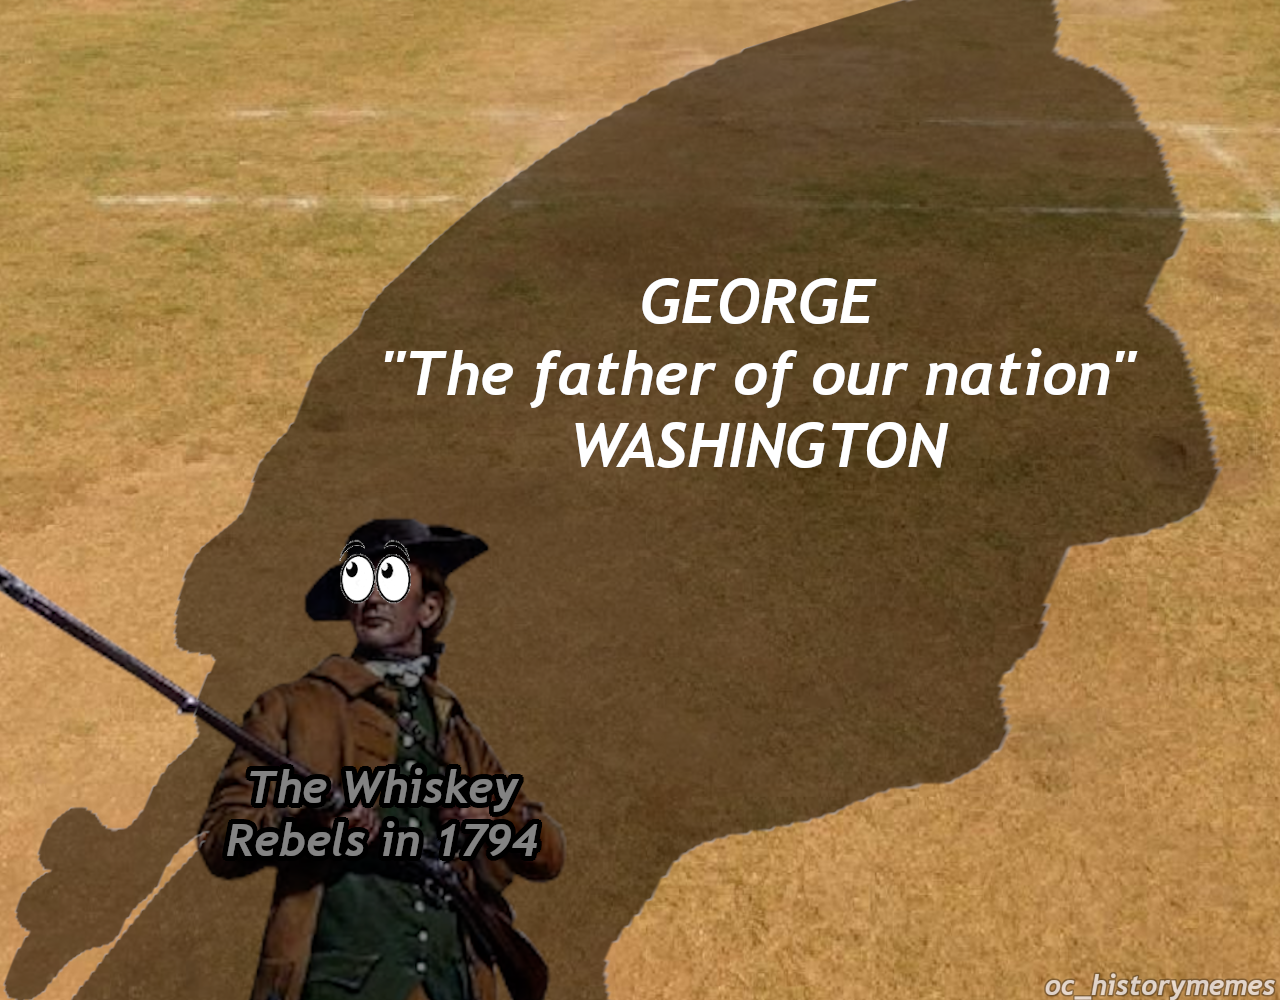 neil patrick harris - George "The father of our nation" Washington The Whiskey Rebels in 1794 oc historymemes